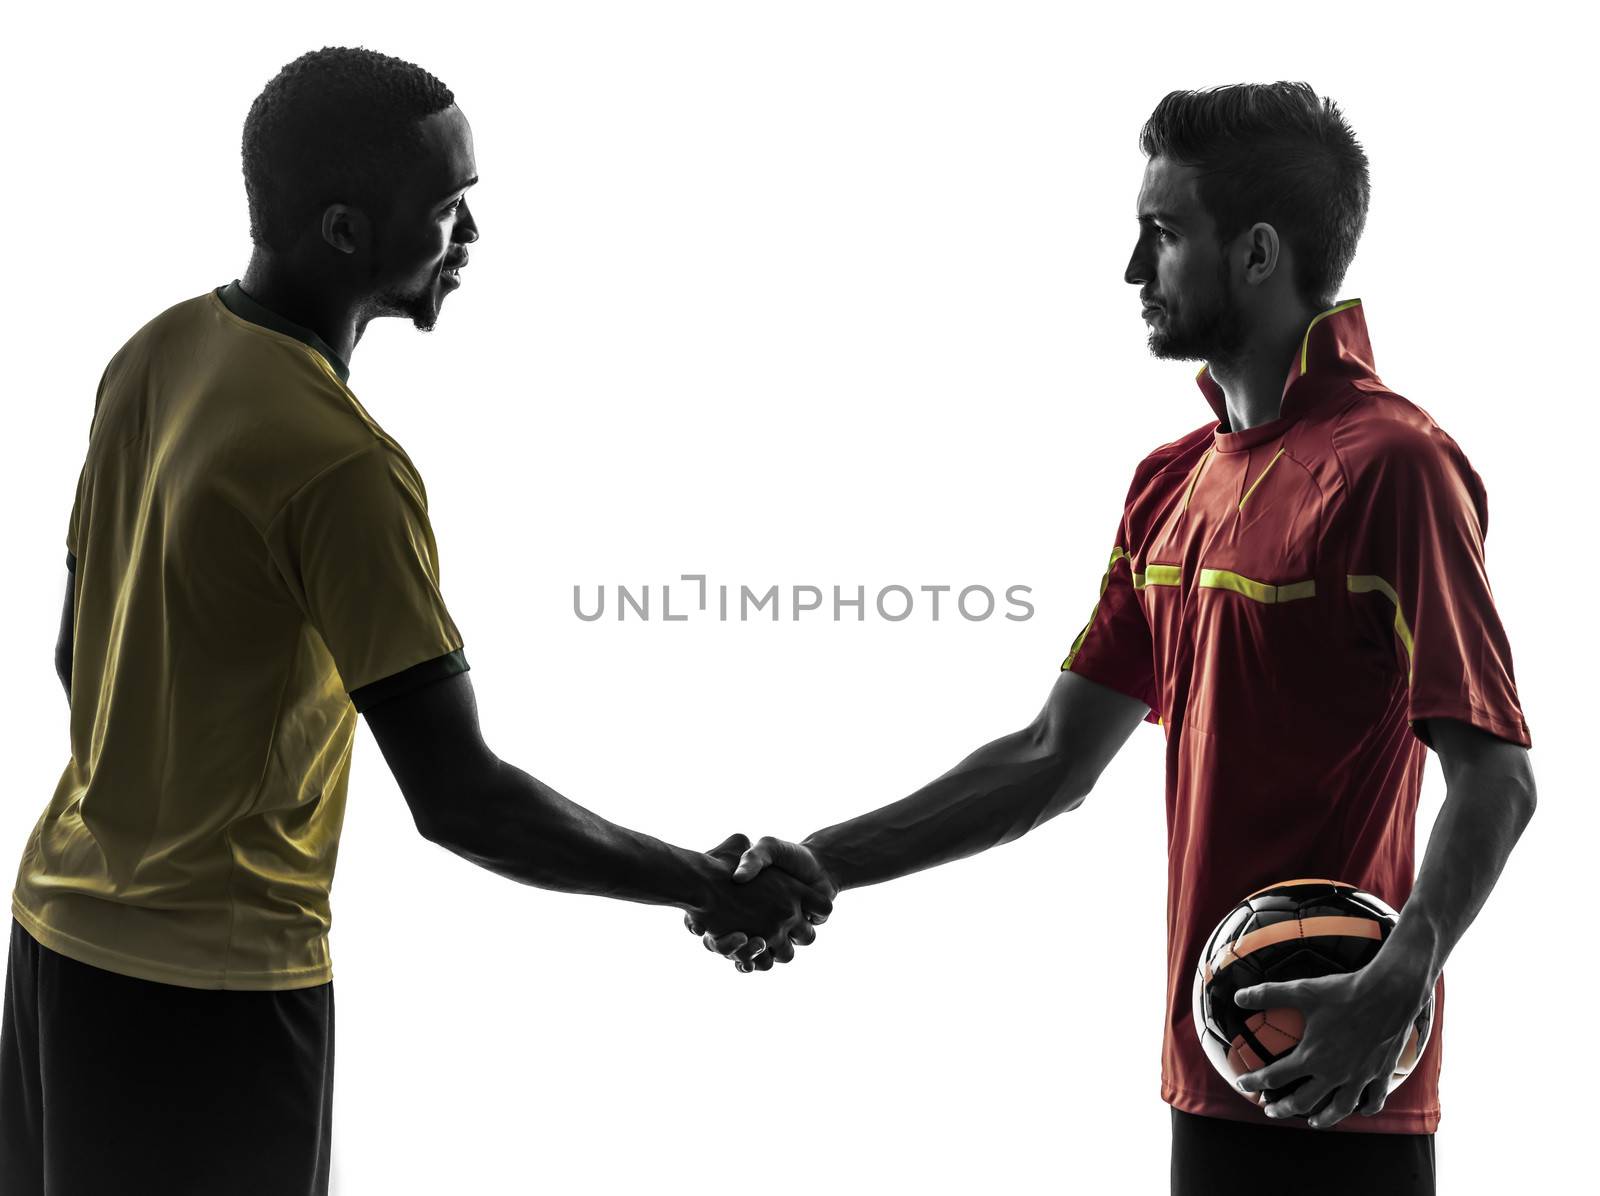 two men soccer player playing football competition handshake handshaking in silhouette on white background